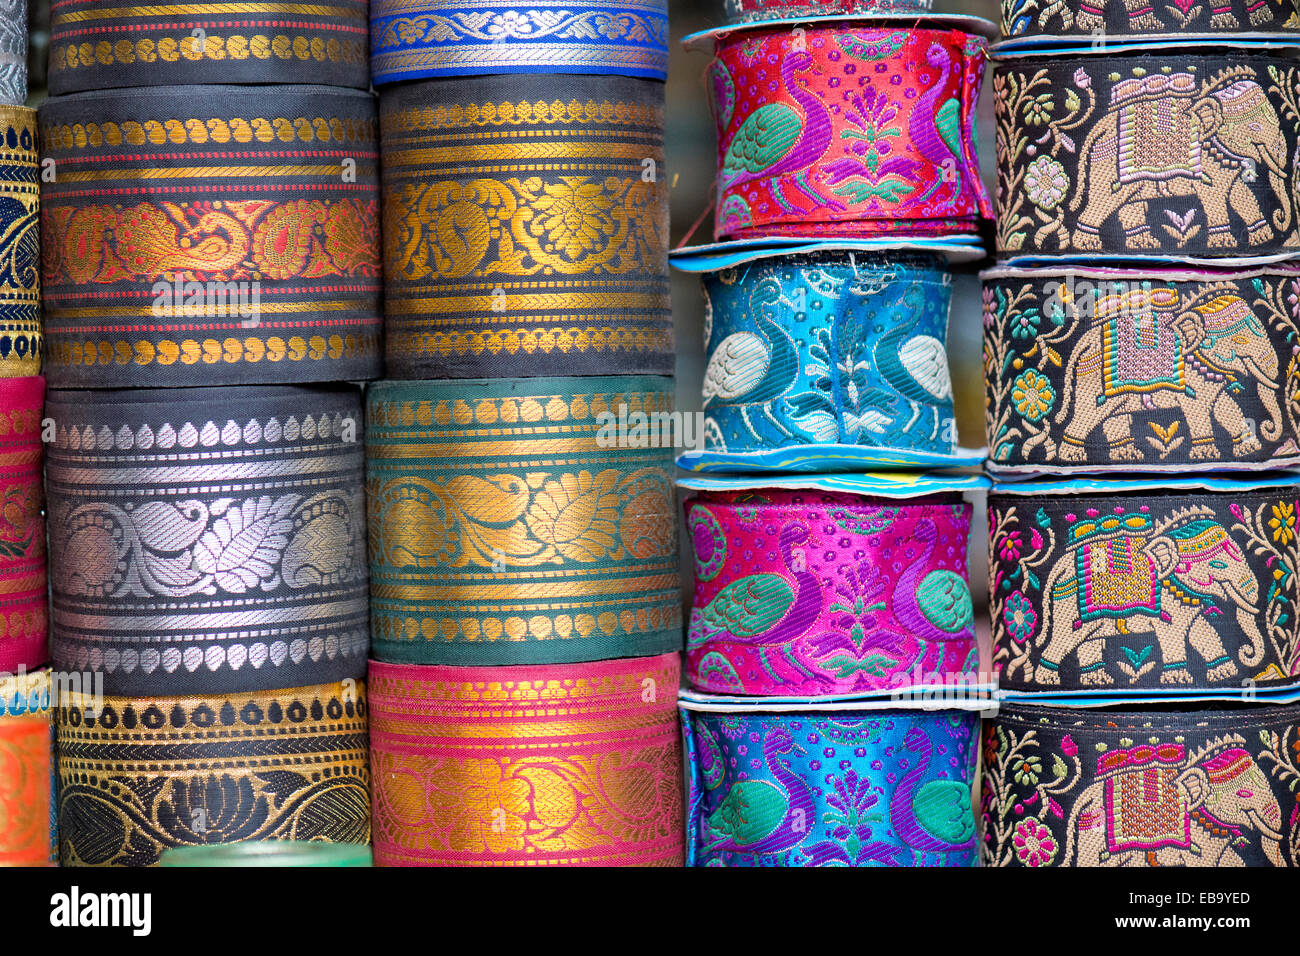 Rolls with embroidered gift ribbons, Jodhpur, Rajasthan, India Stock Photo